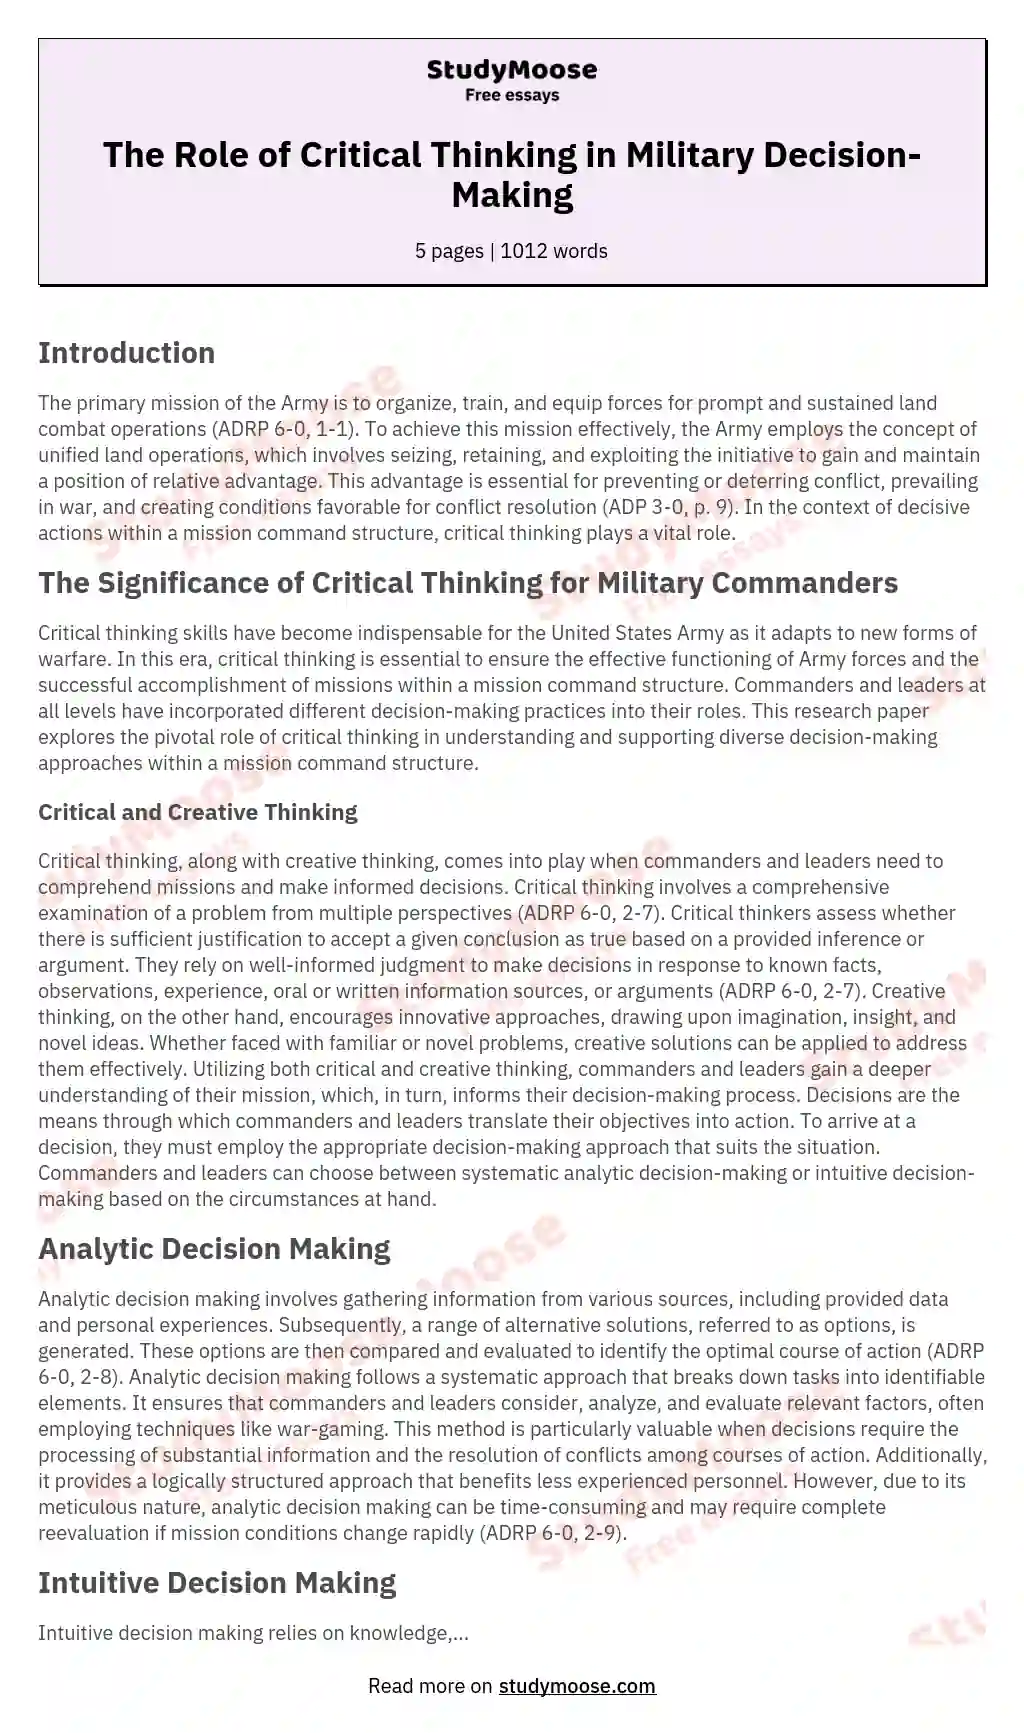 The Role of Critical Thinking in Military Decision-Making essay